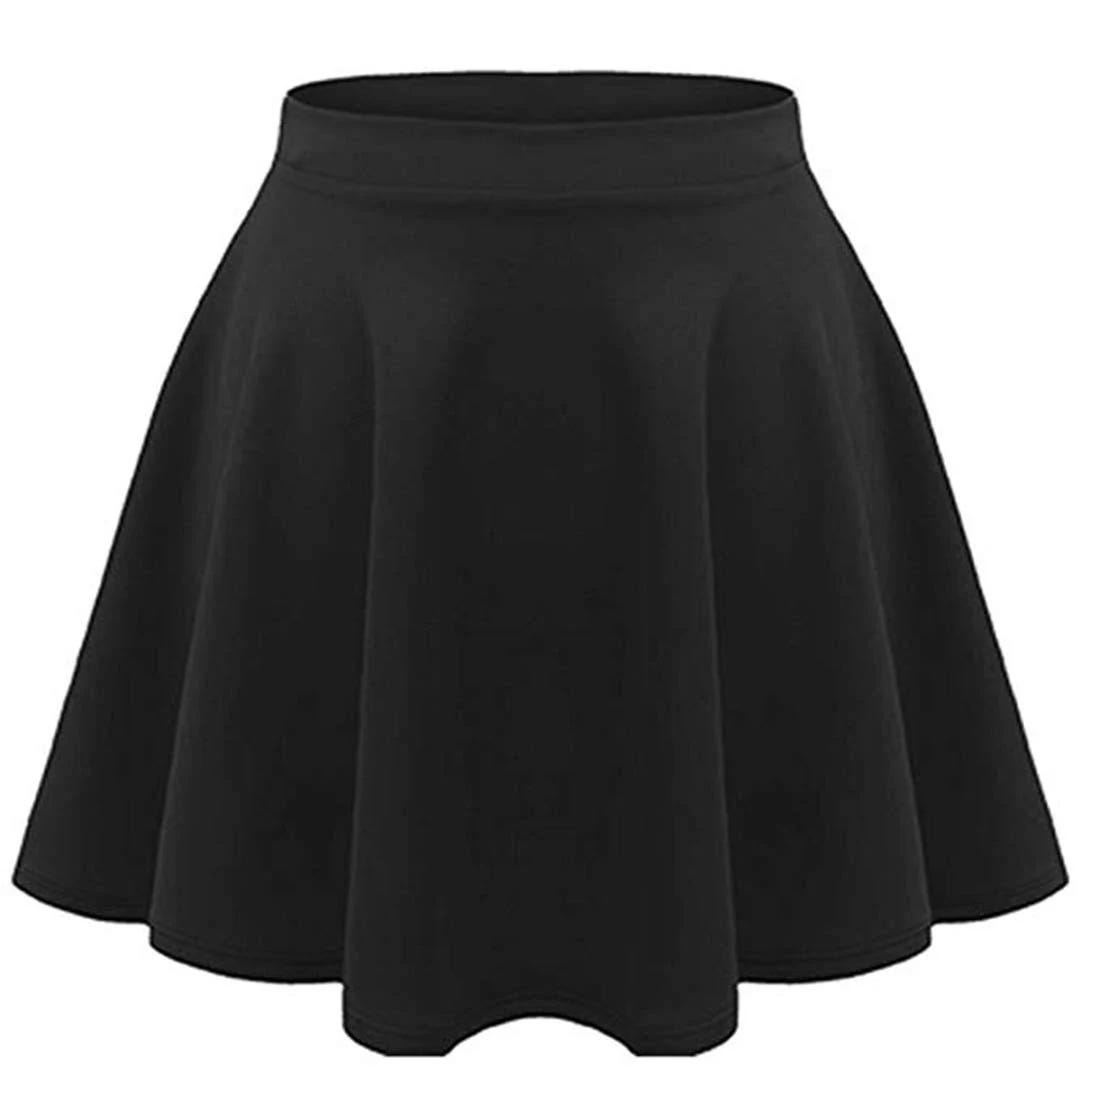 Loxdonz Girls' Flared Plain Pleated Skater Skirt - Stretchy, Comfortable, and Versatile | Image